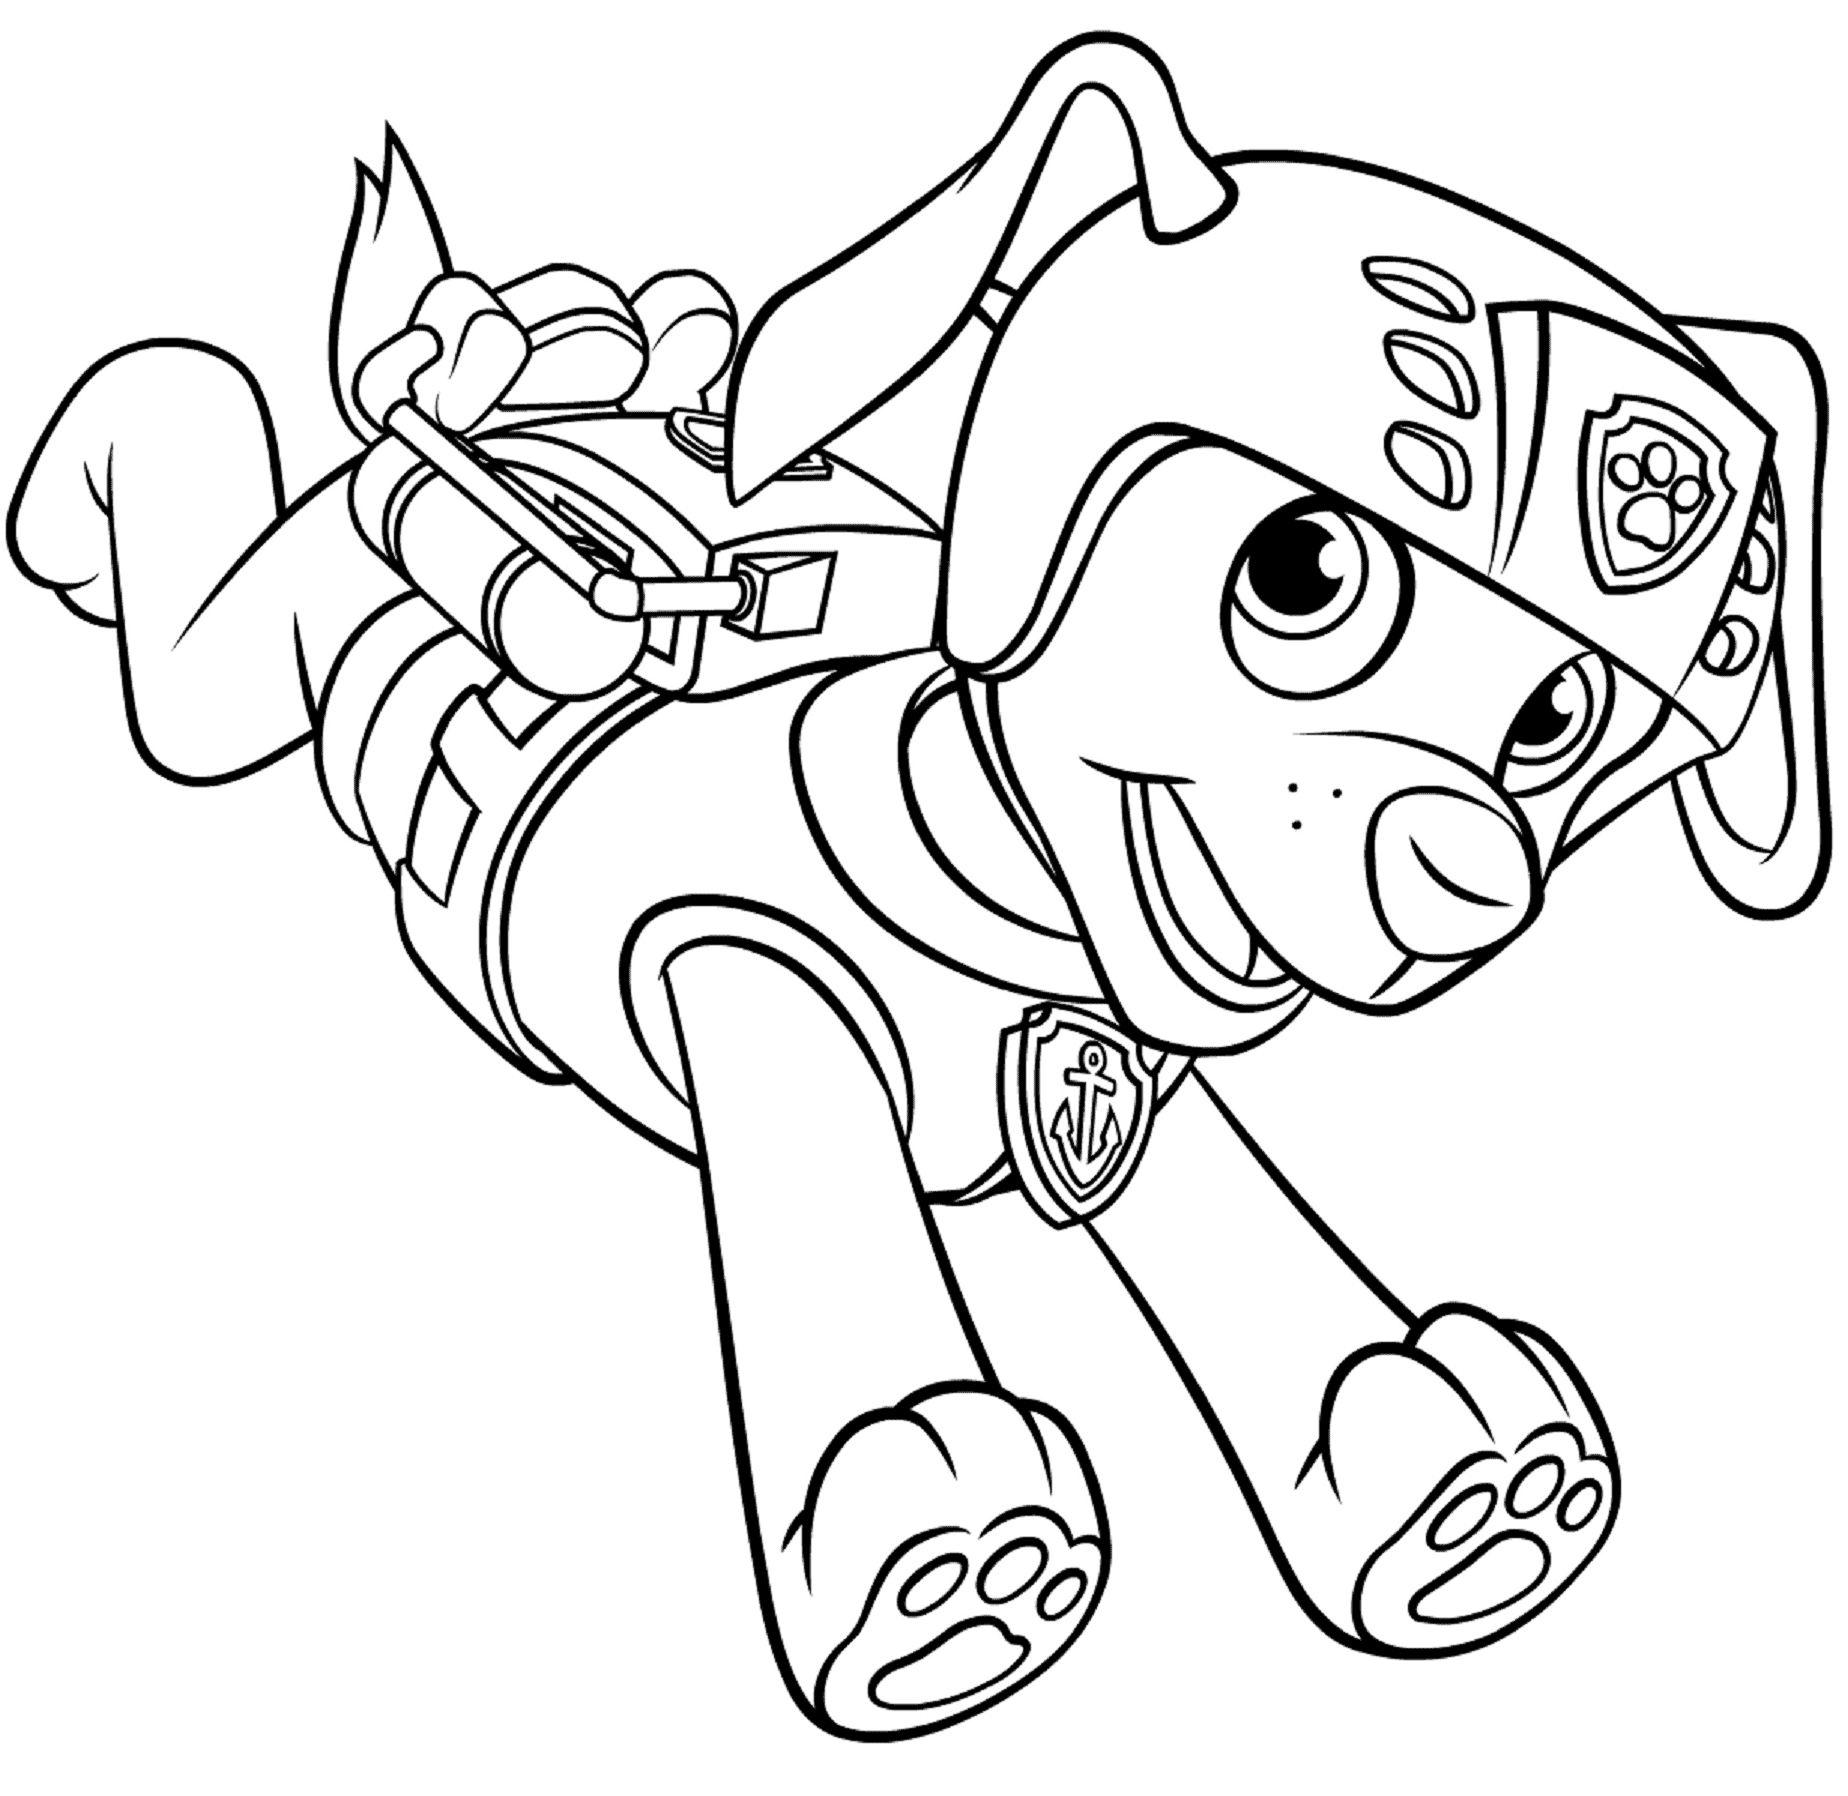 Zuma With Scuba Gear Backpack Paw Patrol Coloring Page